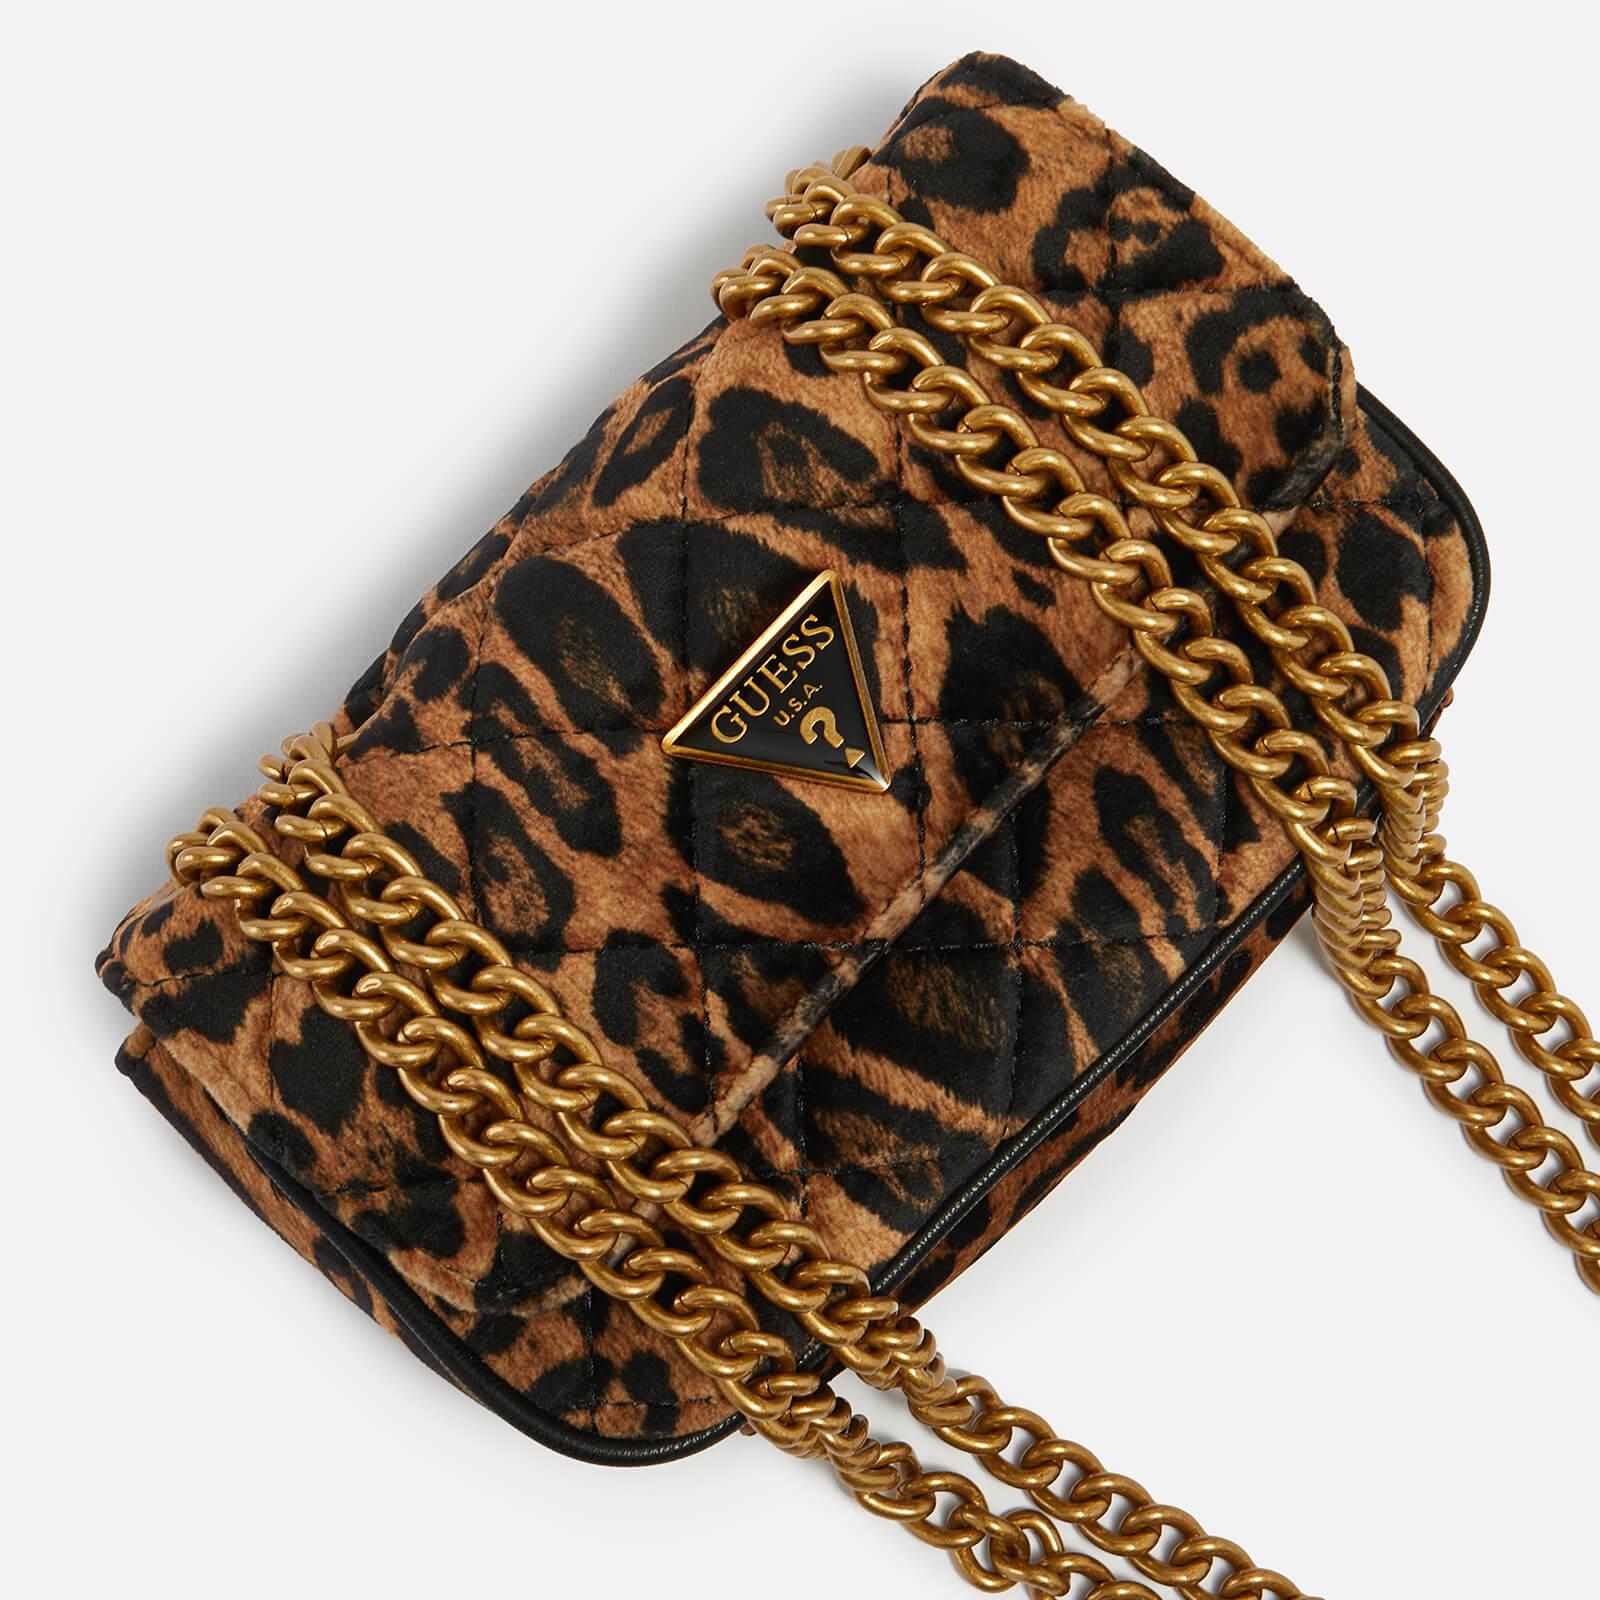 Guess Cessily Micro Leopard-print Quilted Shell Bag in Brown | Lyst